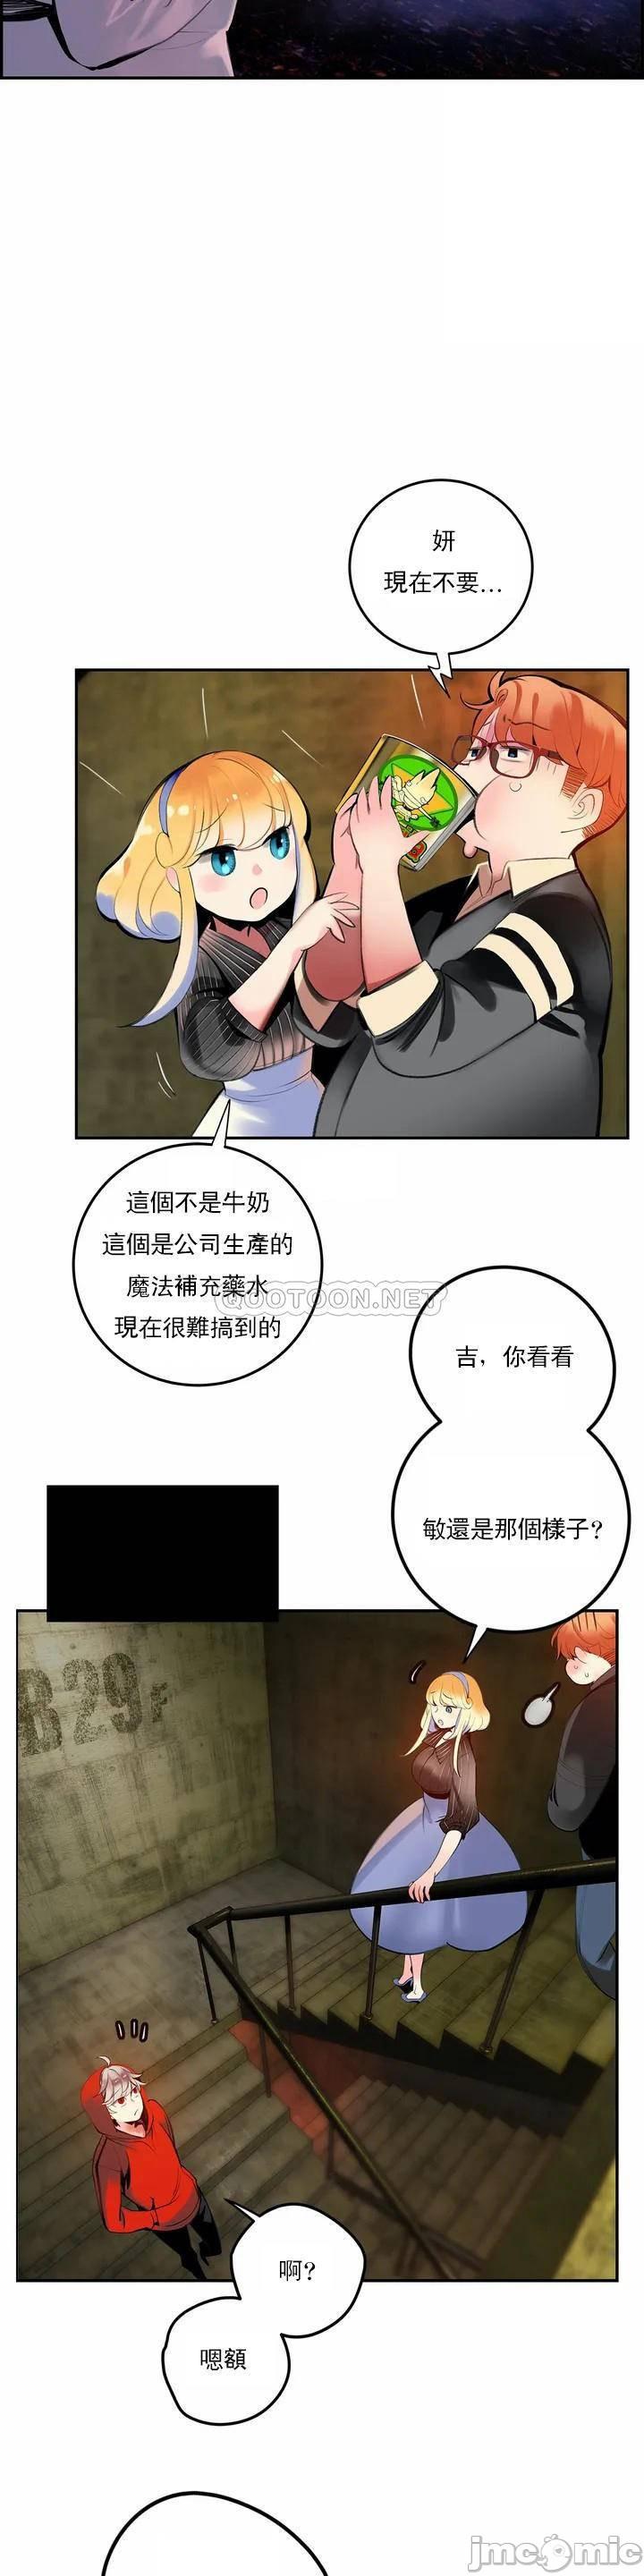 [Juder] Lilith`s Cord (第二季) Ch.77-93 end [Chinese] 487